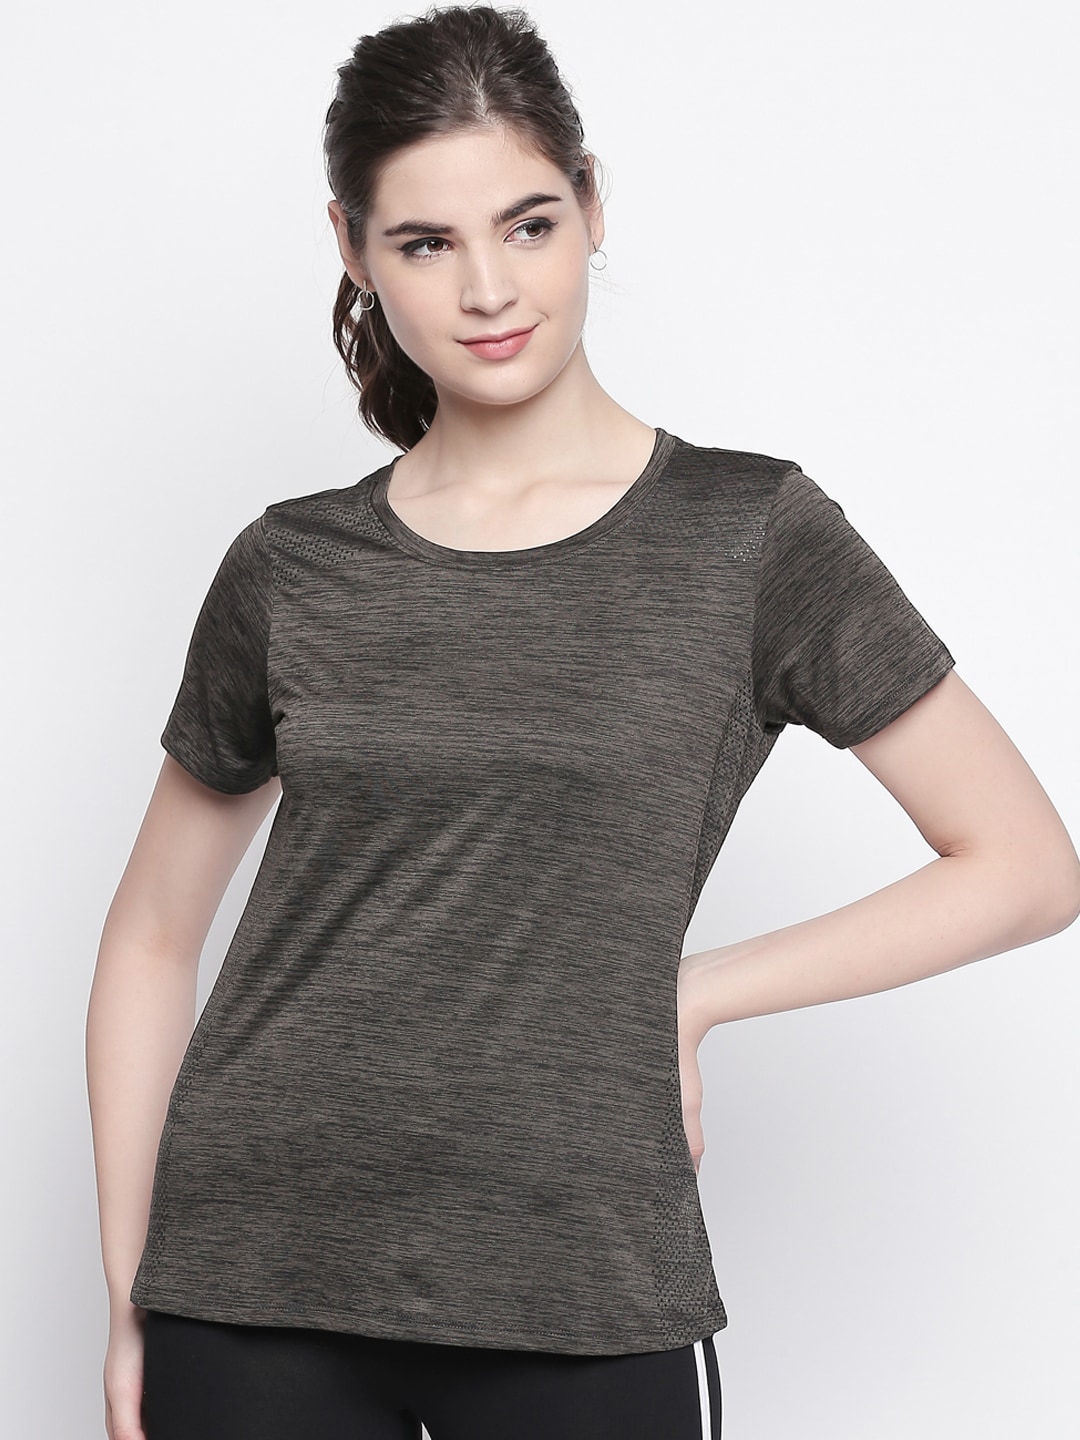 Ajile by Pantaloons Women Charcoal Grey Solid Round Neck T-shirt Price in India